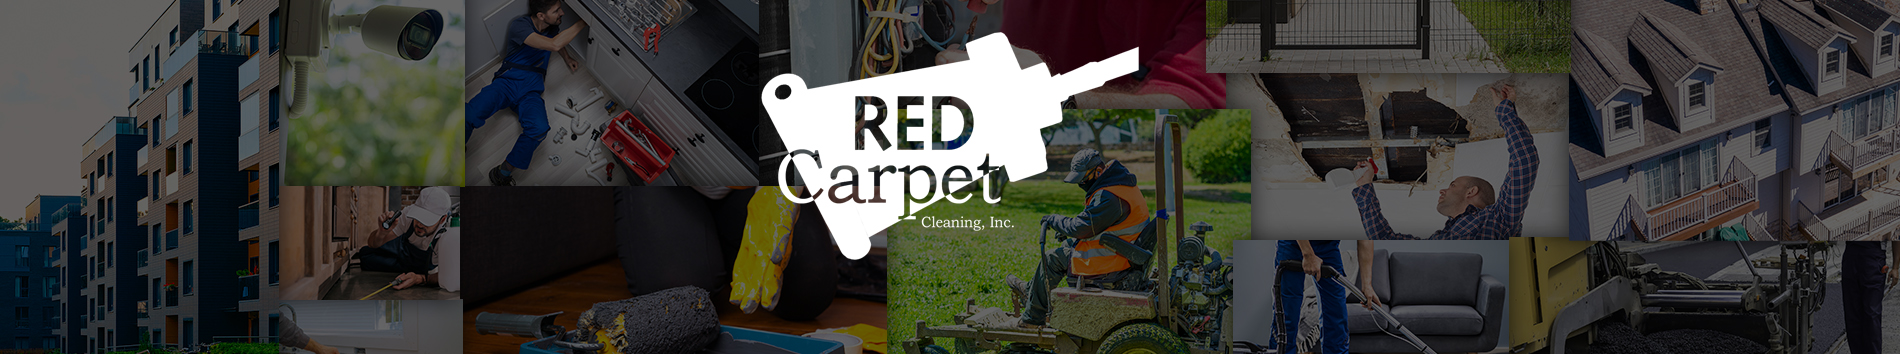 Red Carpet Cleaning Inc.